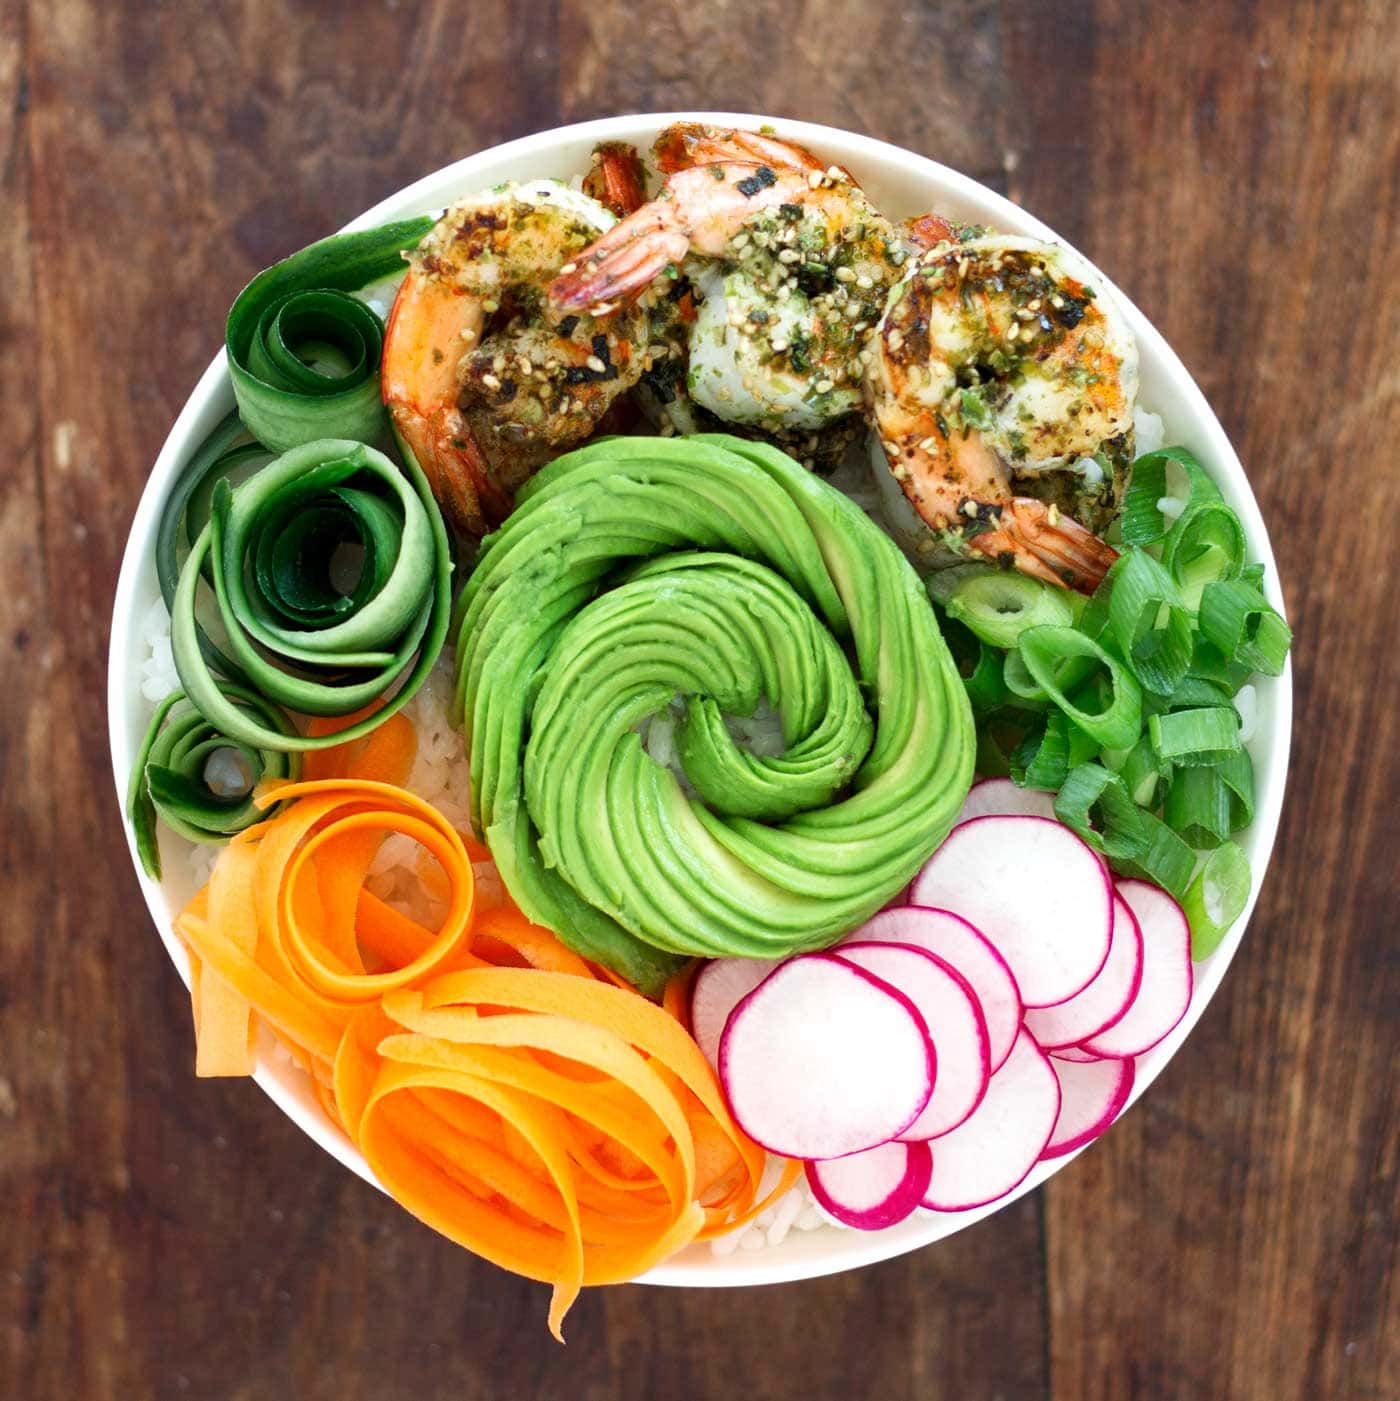 These sushi bowls only take 25 mins to make and are perfect for a quick weeknight meal. They are gluten free and can be made paleo and low carb/keto!